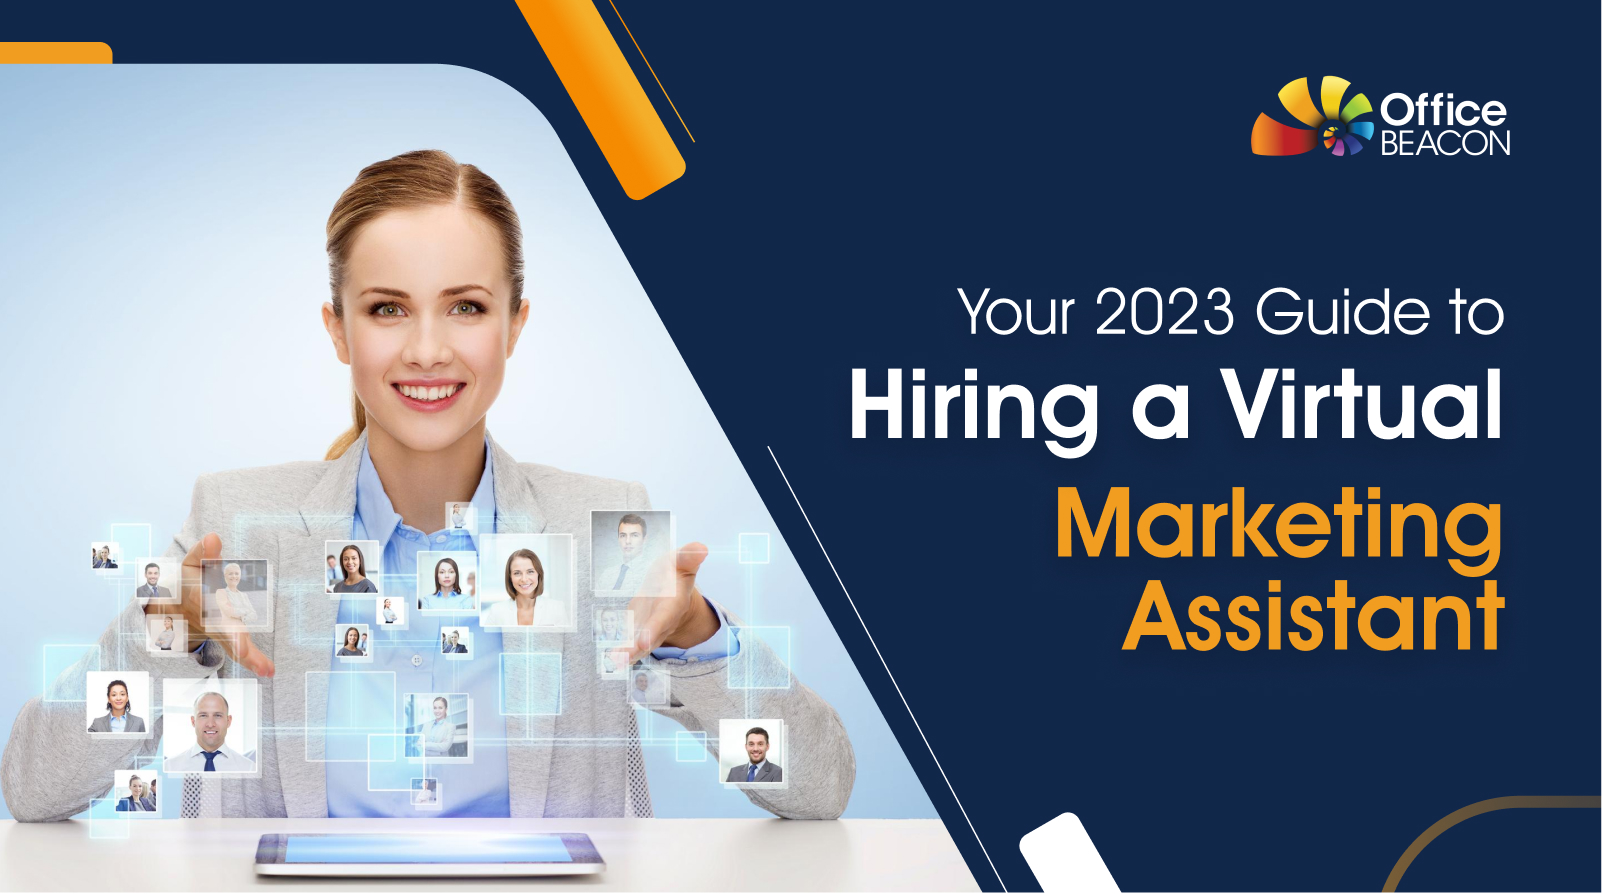 Your 2023 Guide to Hiring a Virtual Marketing Assistant